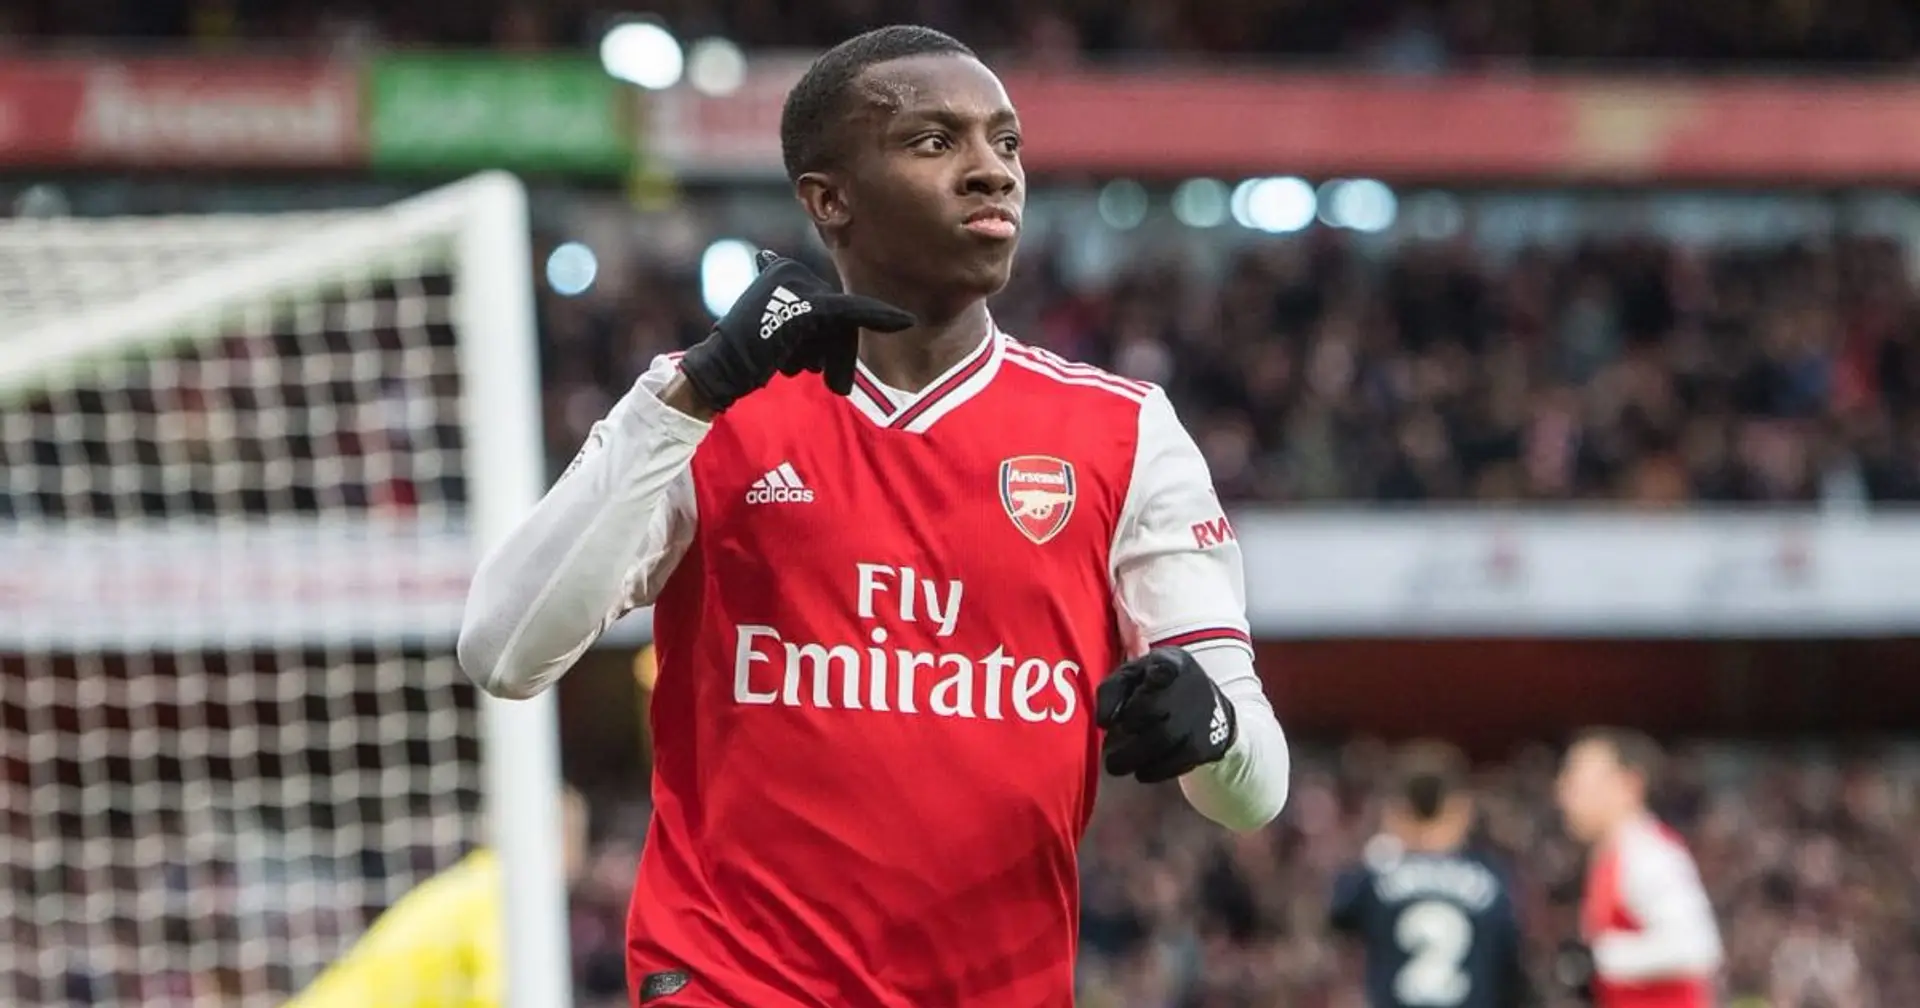 'Arsenal should take care of him because he is very talented': Denis Suarez backs Eddie Nketiah for success